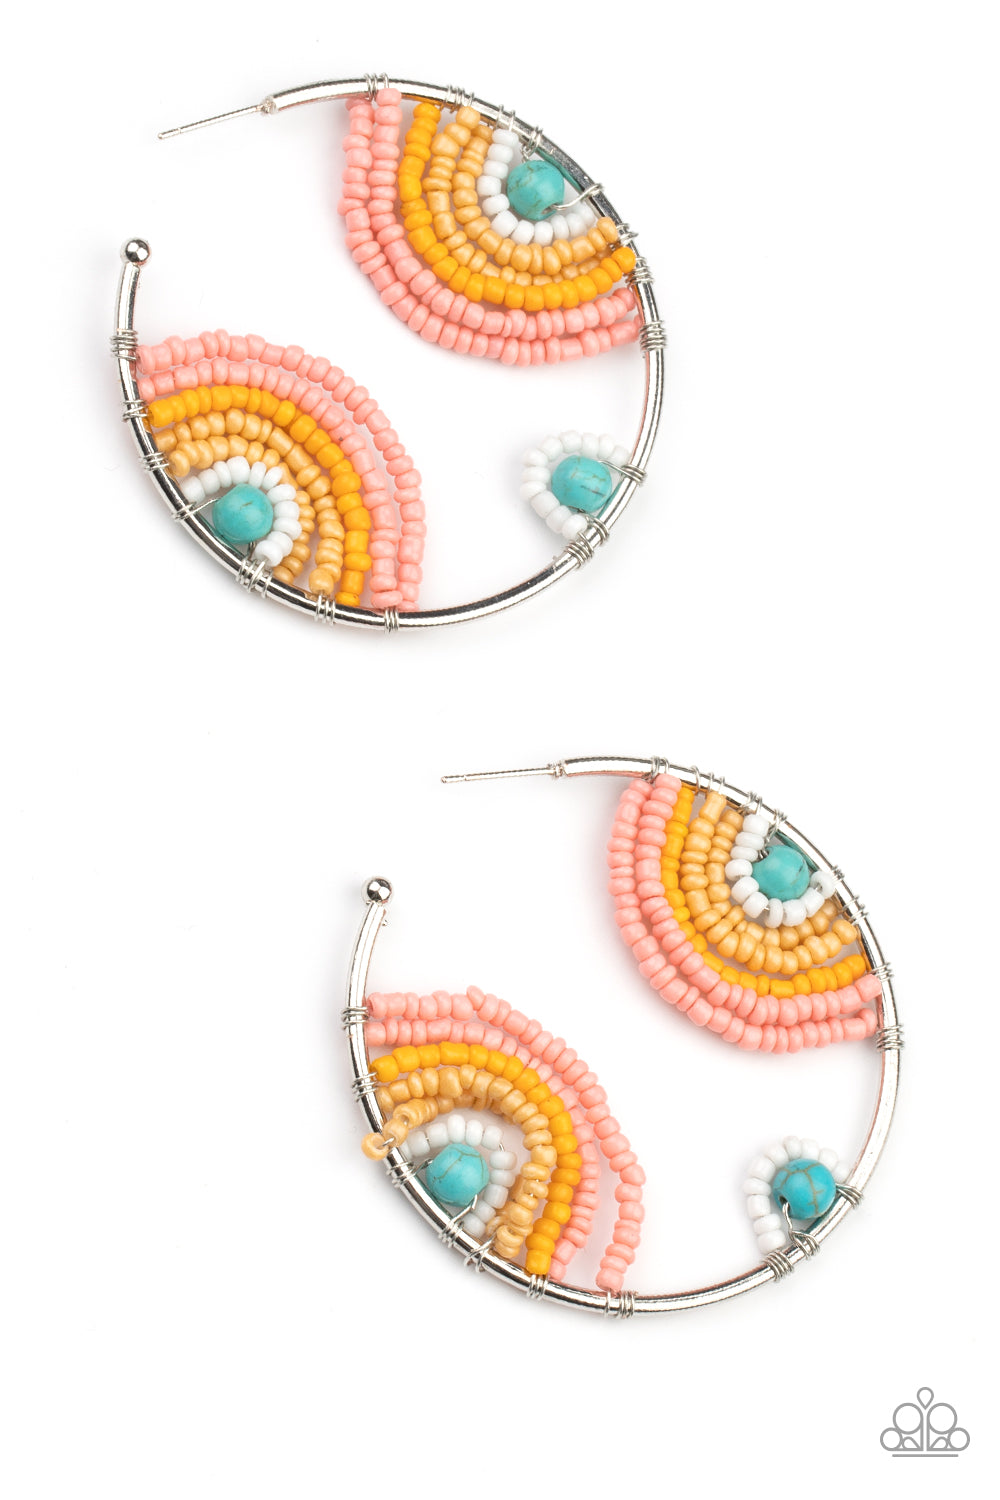 Rainbow Horizons Multi Hoop Earring - Paparazzi Accessories  Rows of white, Desert Mist, Marigold, and Burnt Coral seed beads curl around turquoise stone centers, creating colorful rainbows inside a delicate wire wrapped hoop. Hoop measures approximately 2" in diameter. Earring attaches to a standard post fitting.  All Paparazzi Accessories are lead free and nickel free!  Sold as one pair of hoop earrings.